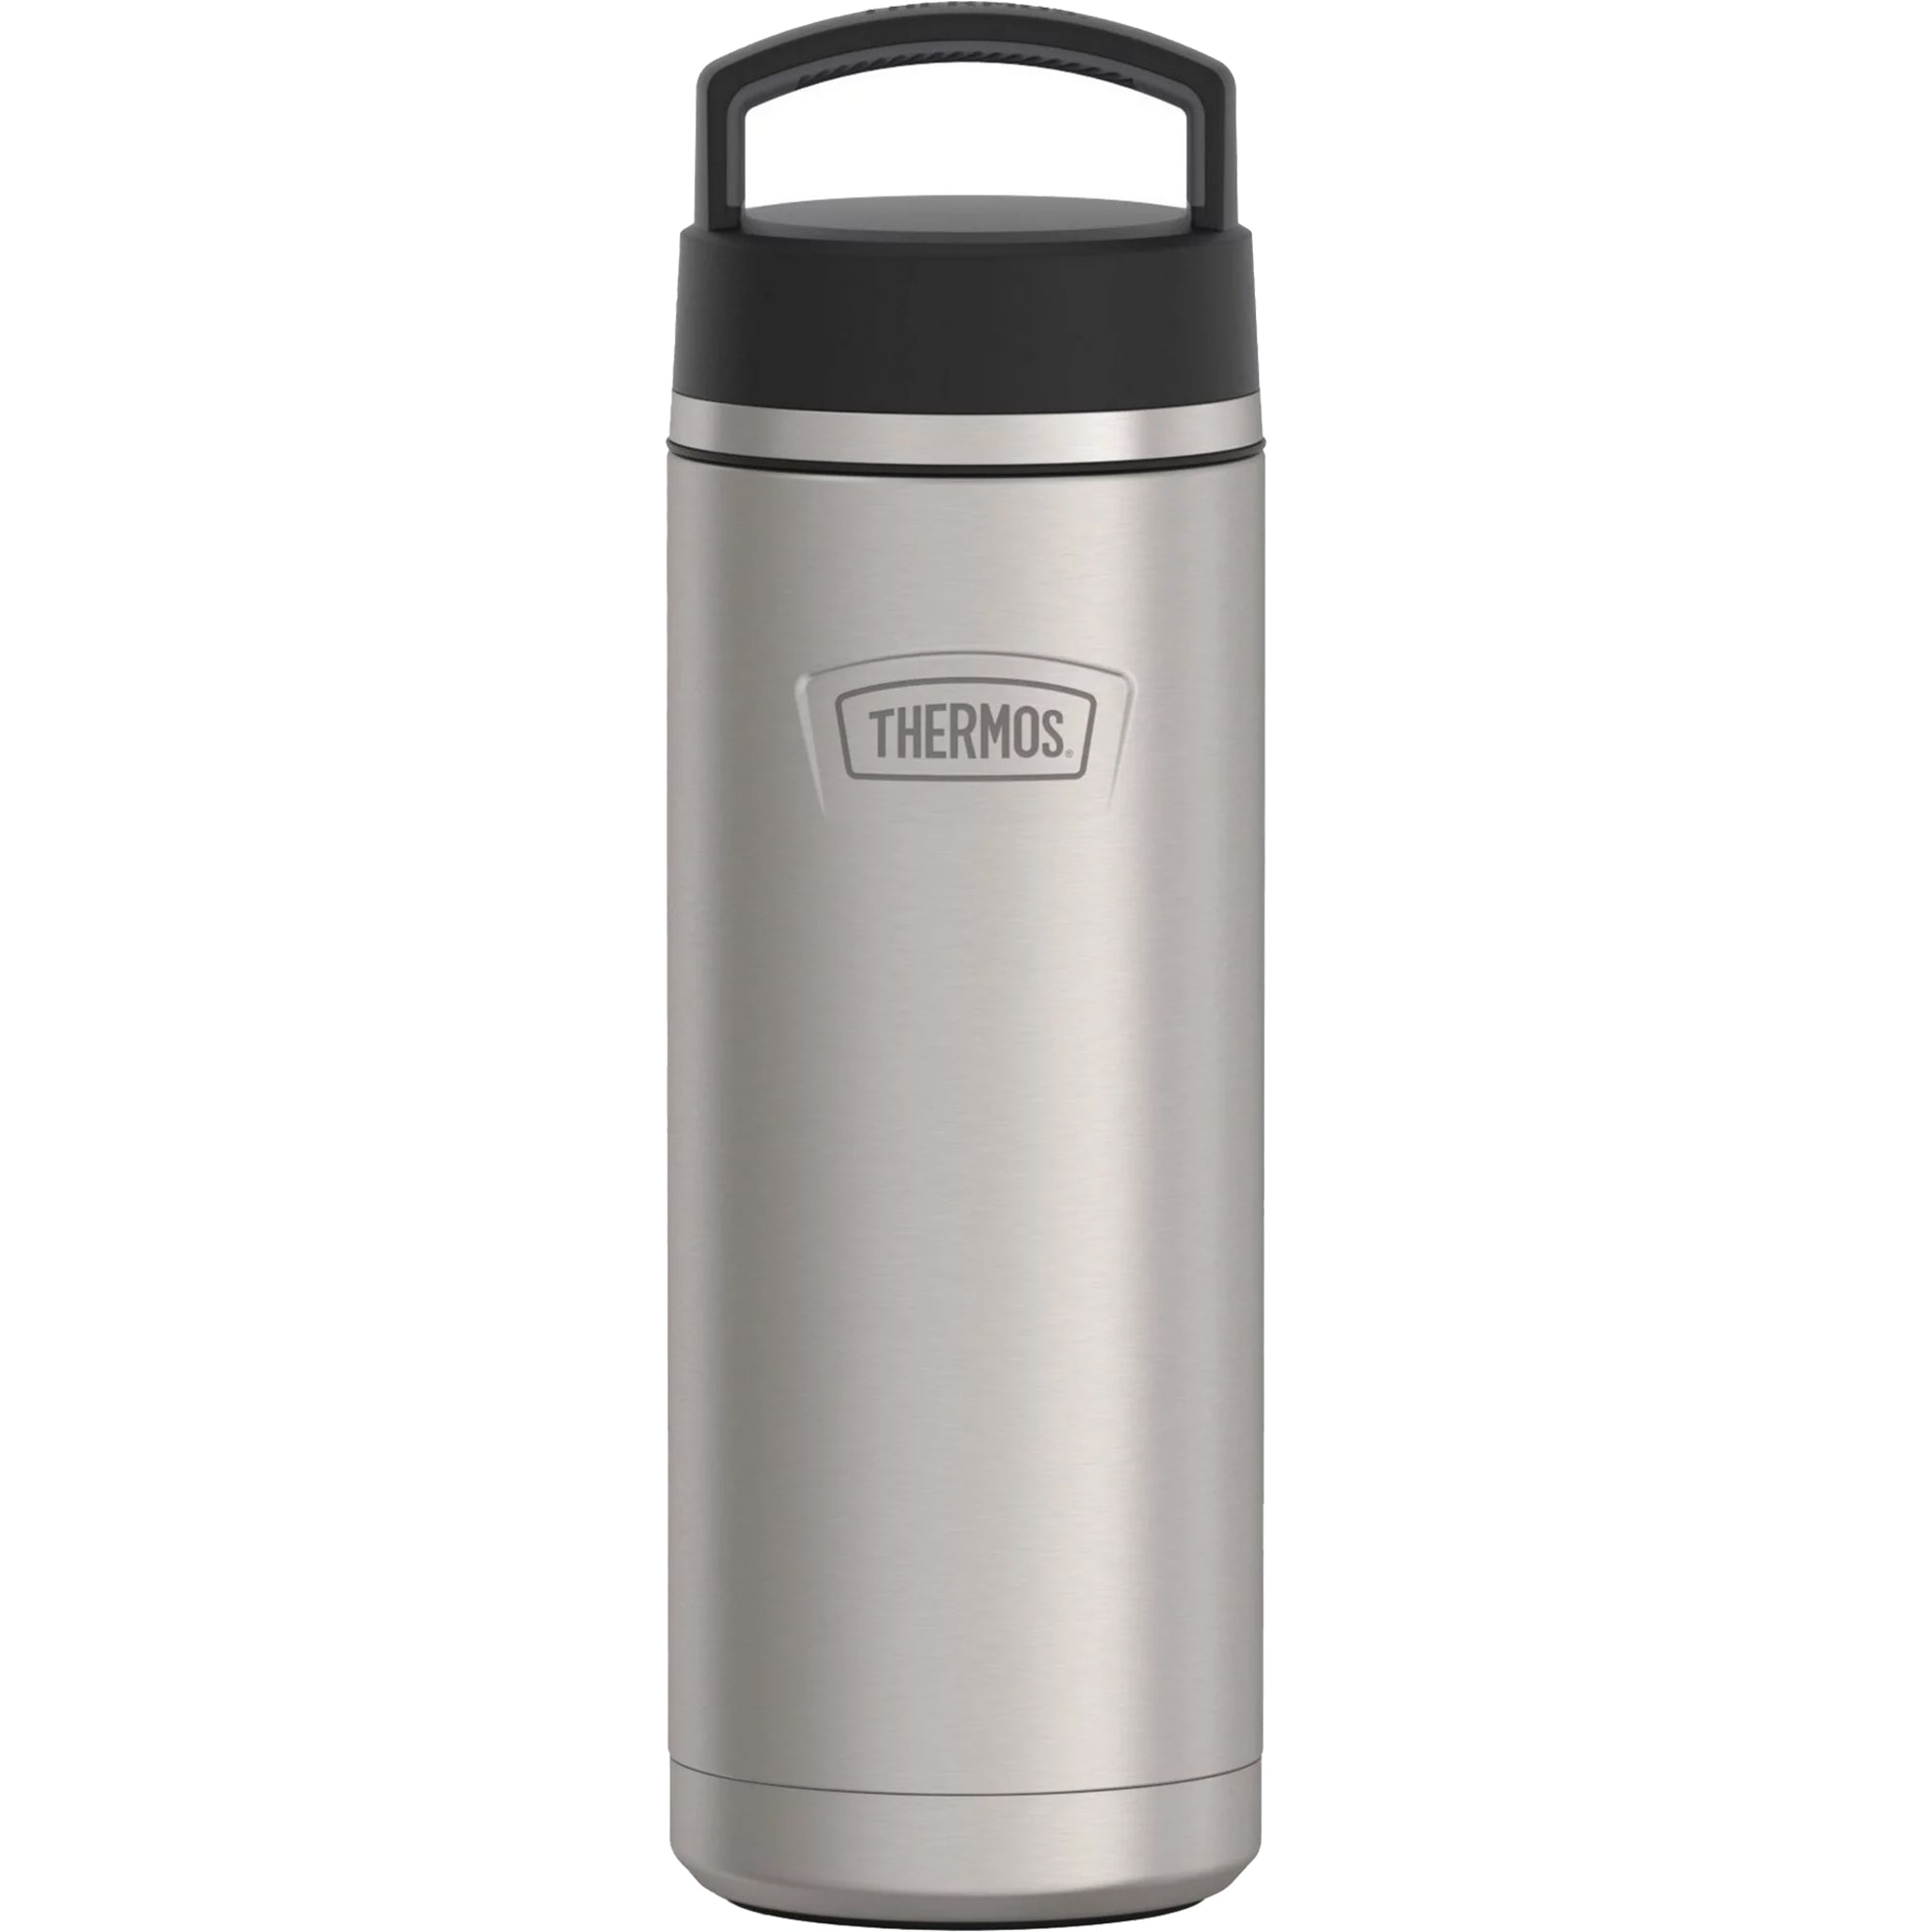 Thermos 32 oz. Icon Insulated Stainless Steel Screw Top Water Bottle Thermos